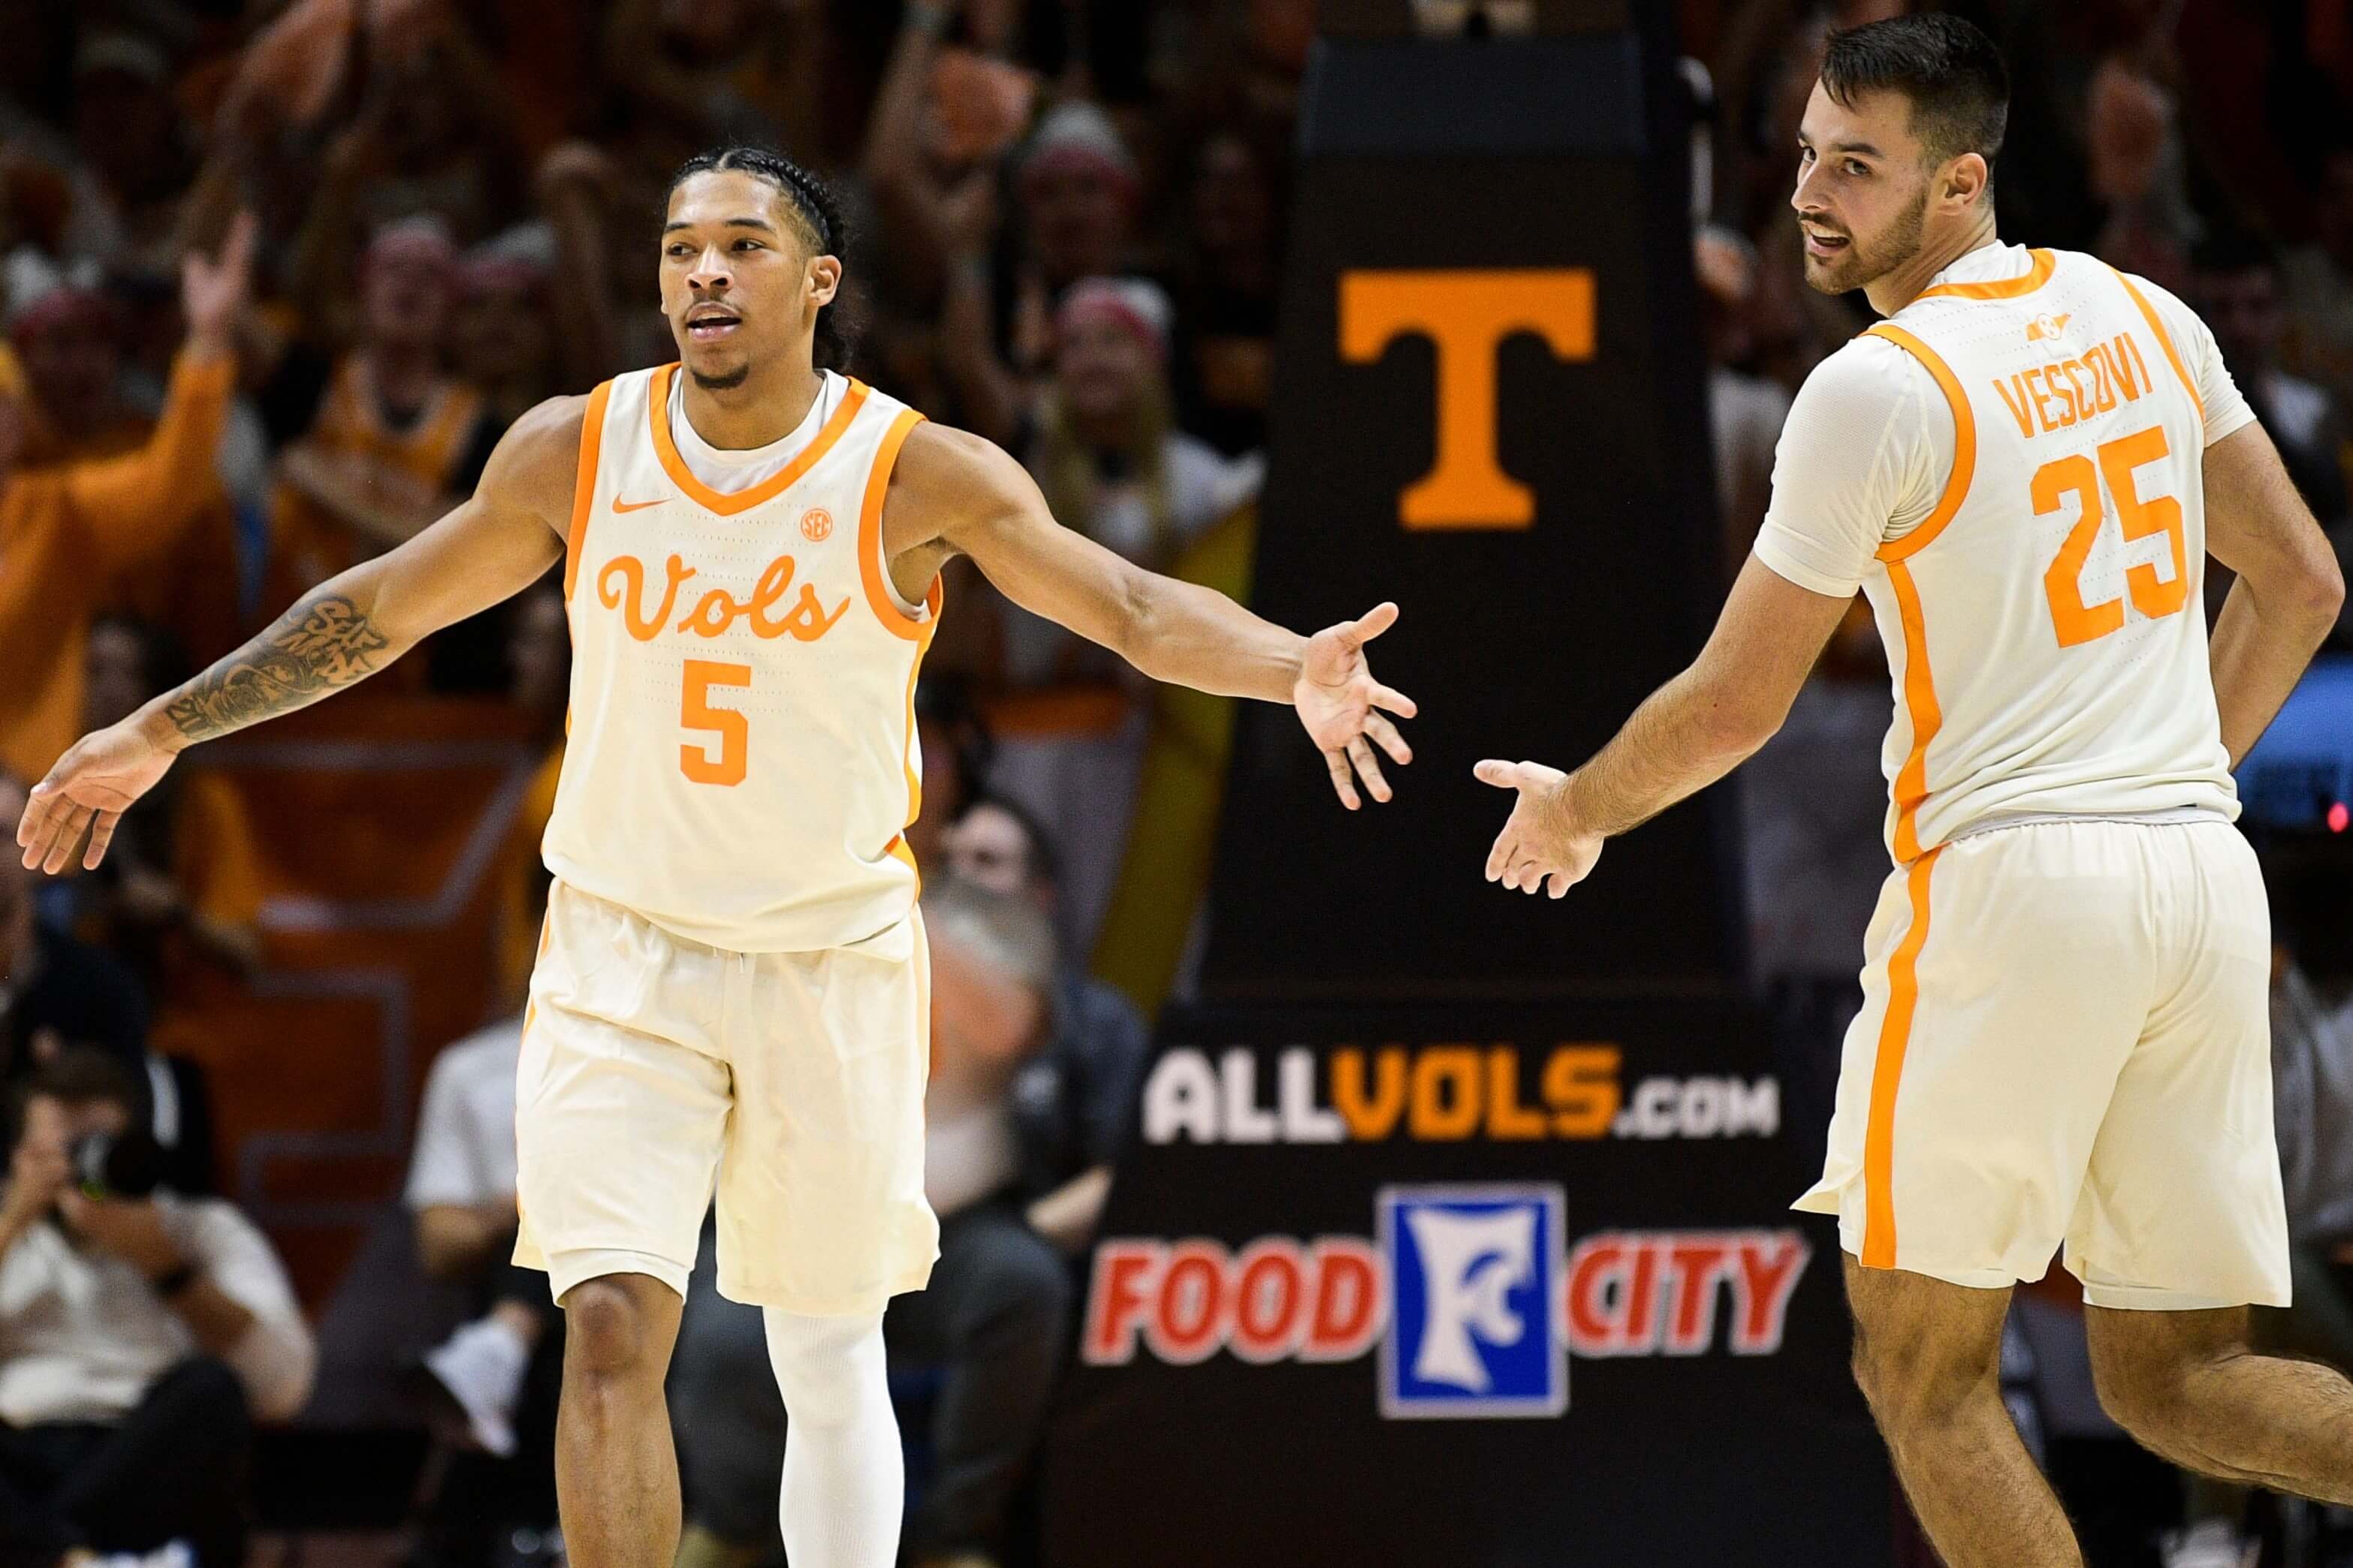 How To Bet - Tennessee vs Vanderbilt Odds, Picks and Predictions: Vols Defense Leads to Road Victory